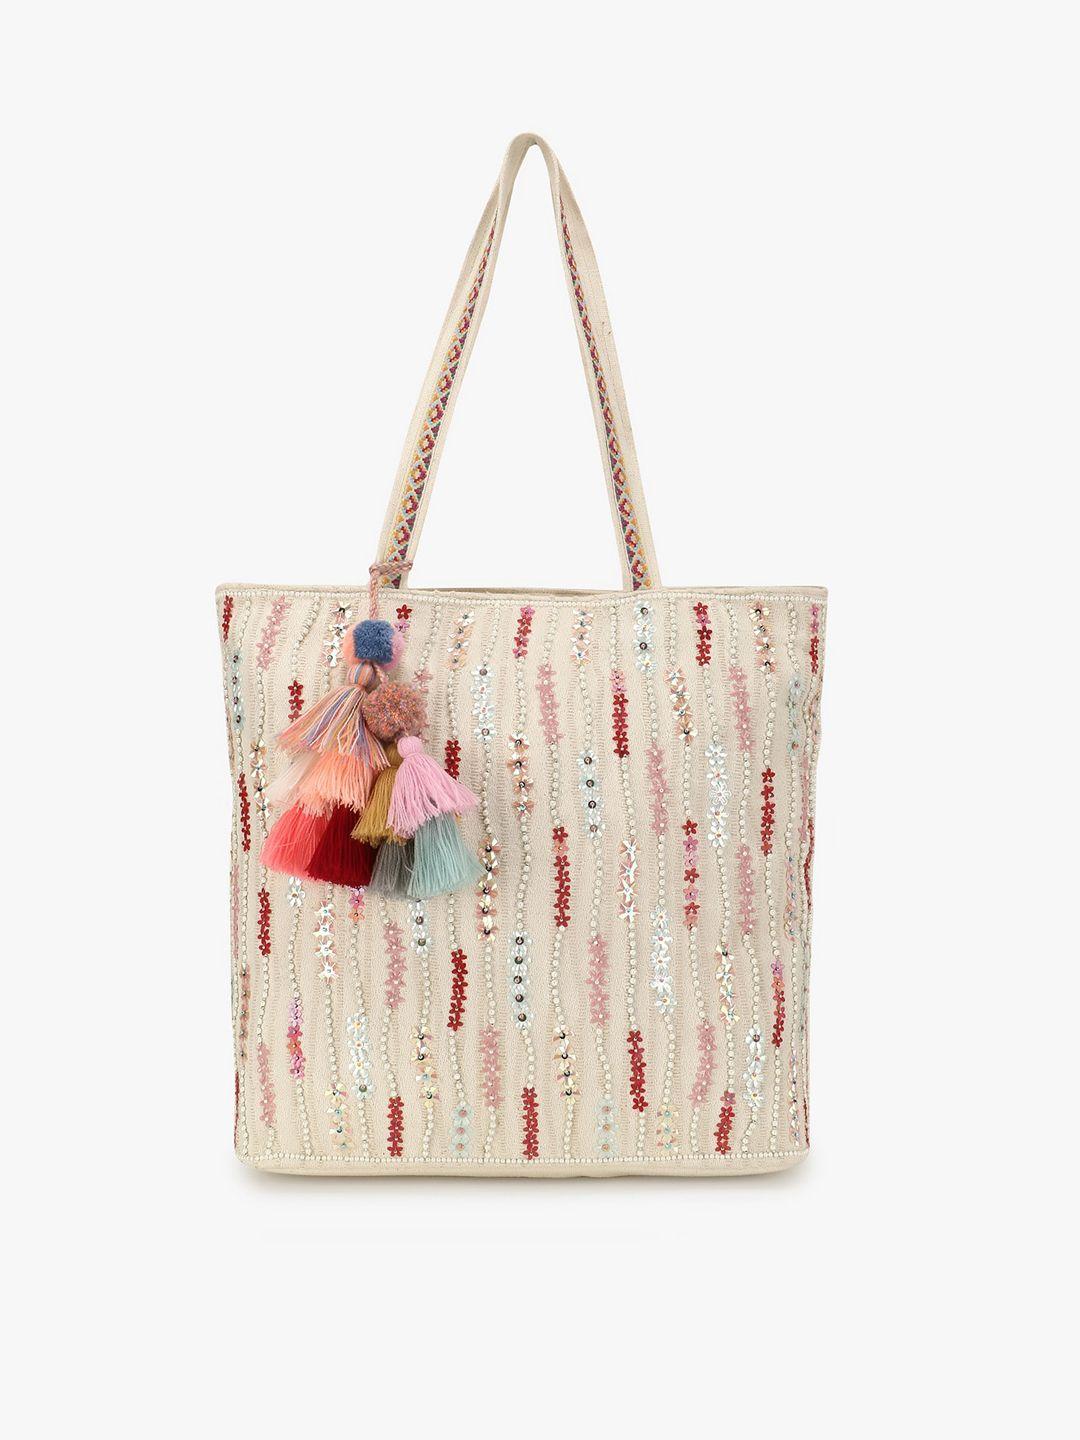 anekaant off white floral embellished shopper tote bag with tasselled